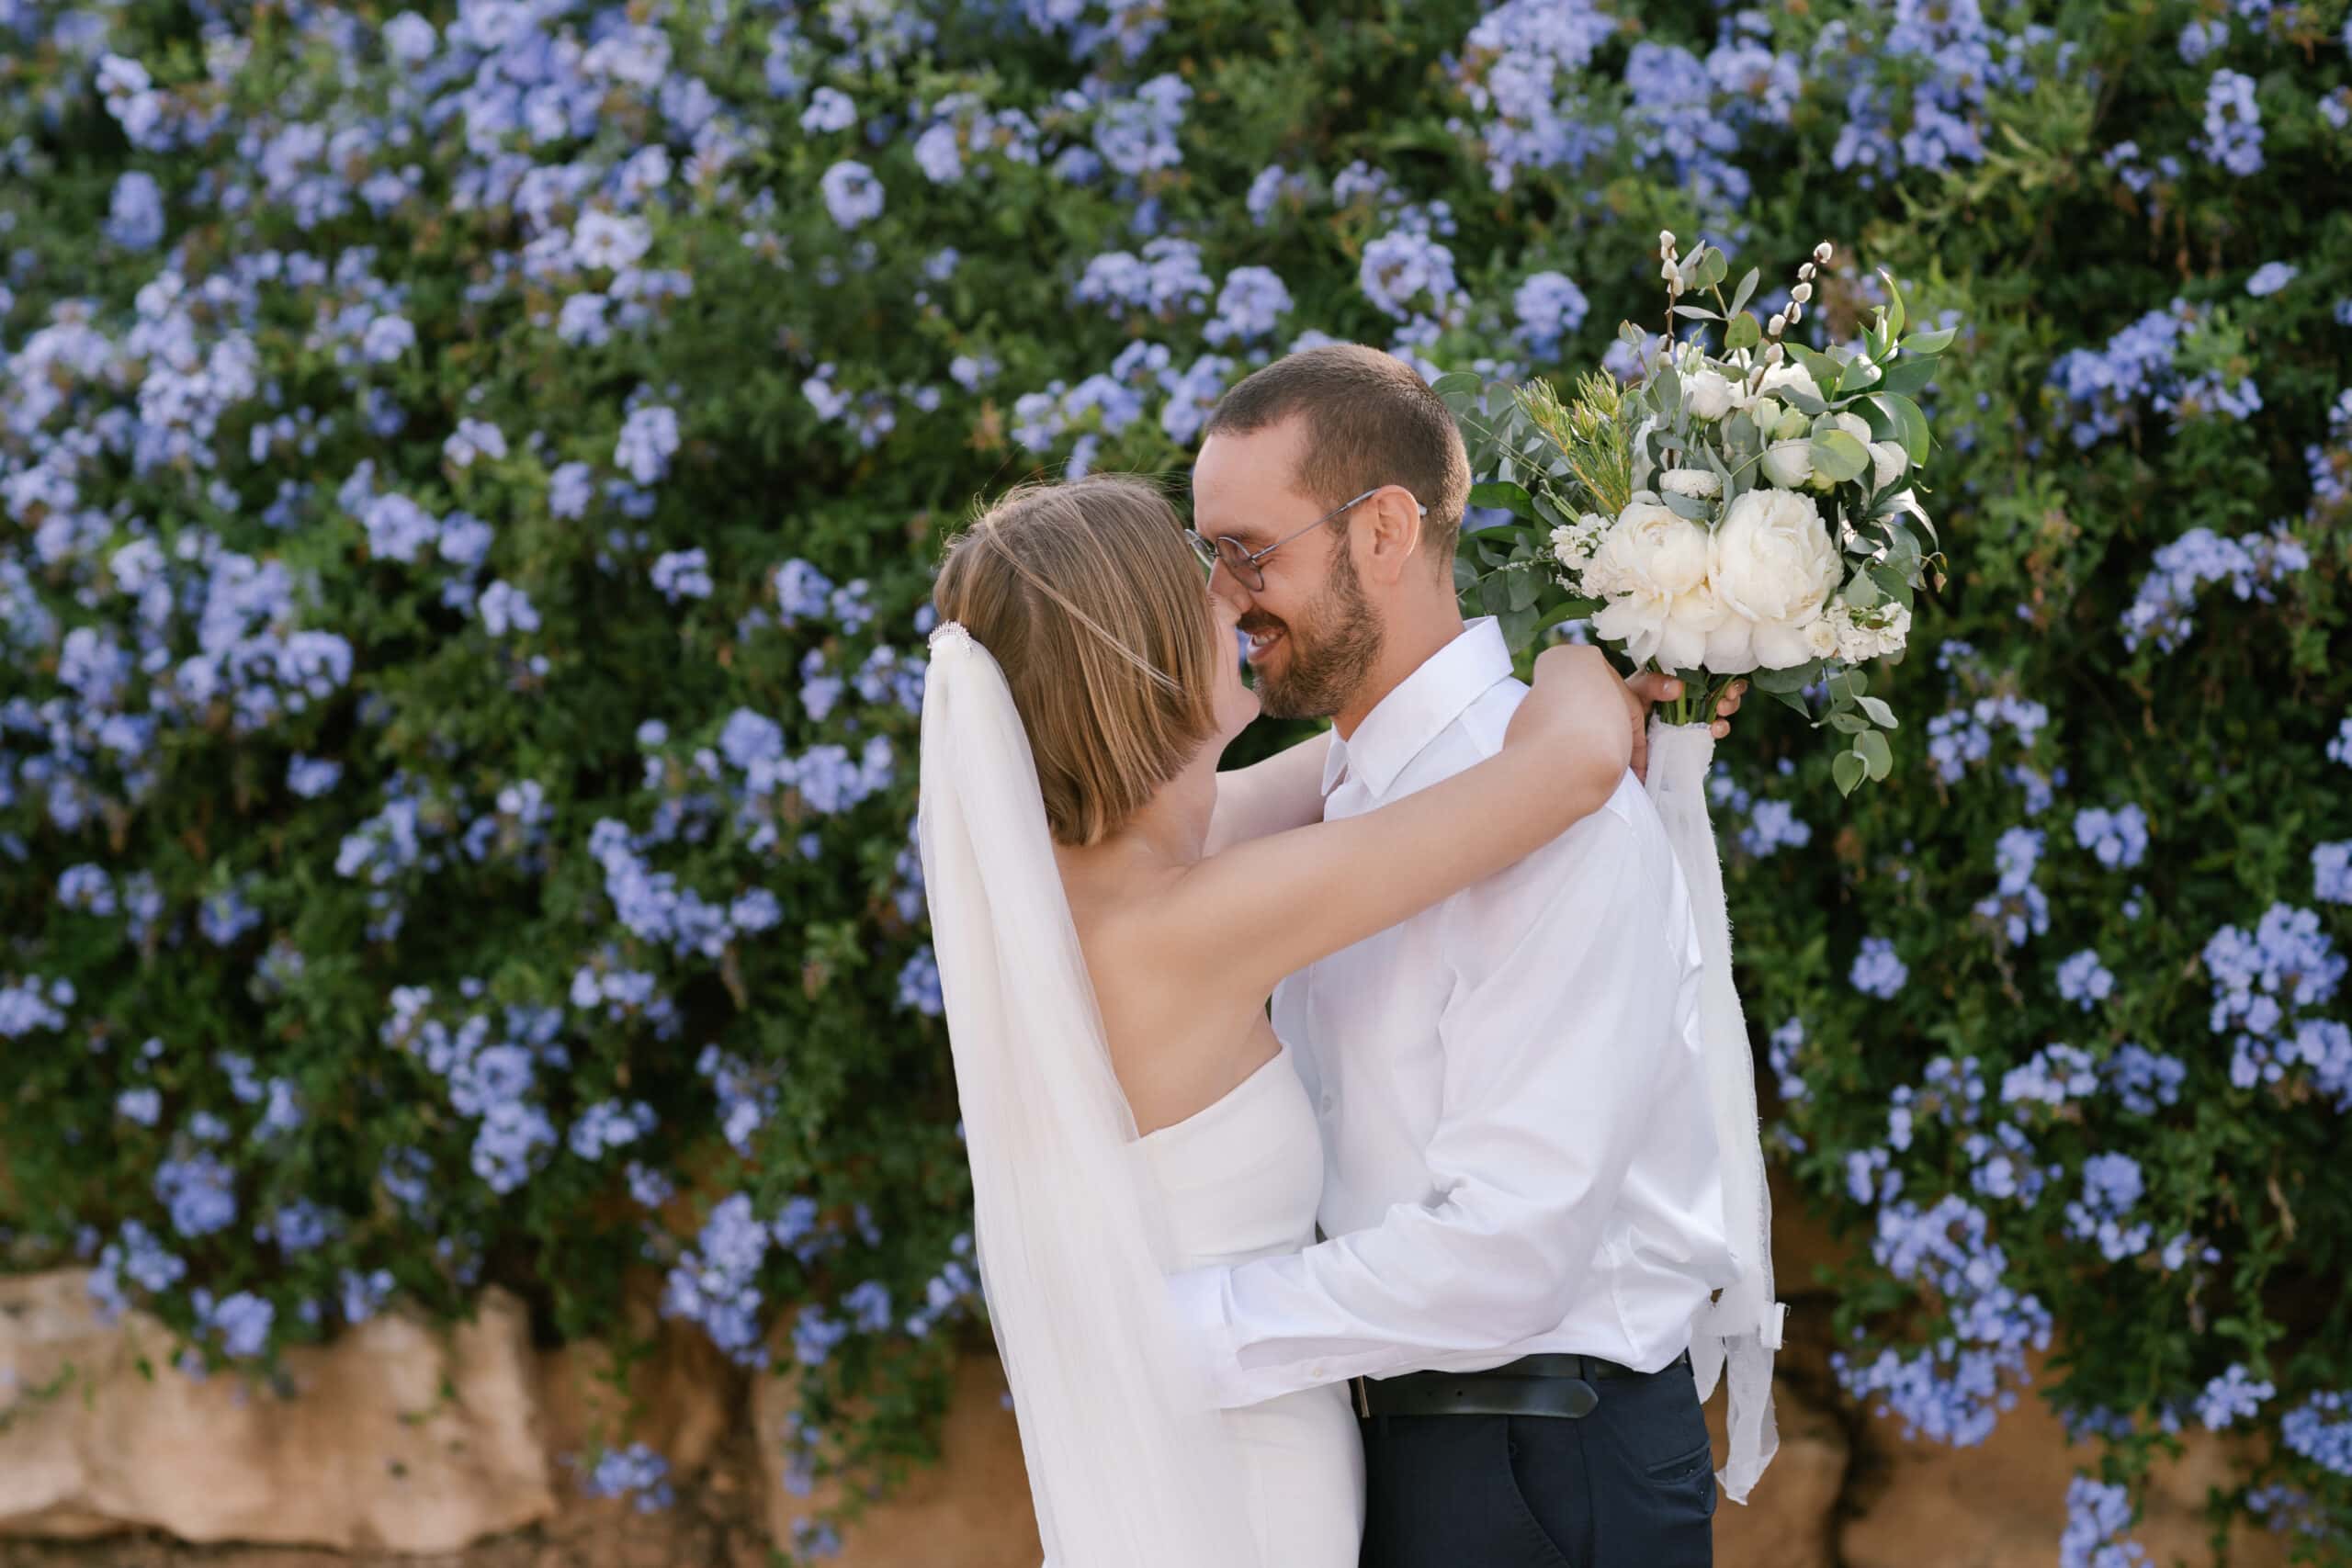 Bride and groom embracing during their First Look, surrounded by blue flowers in Algarve.